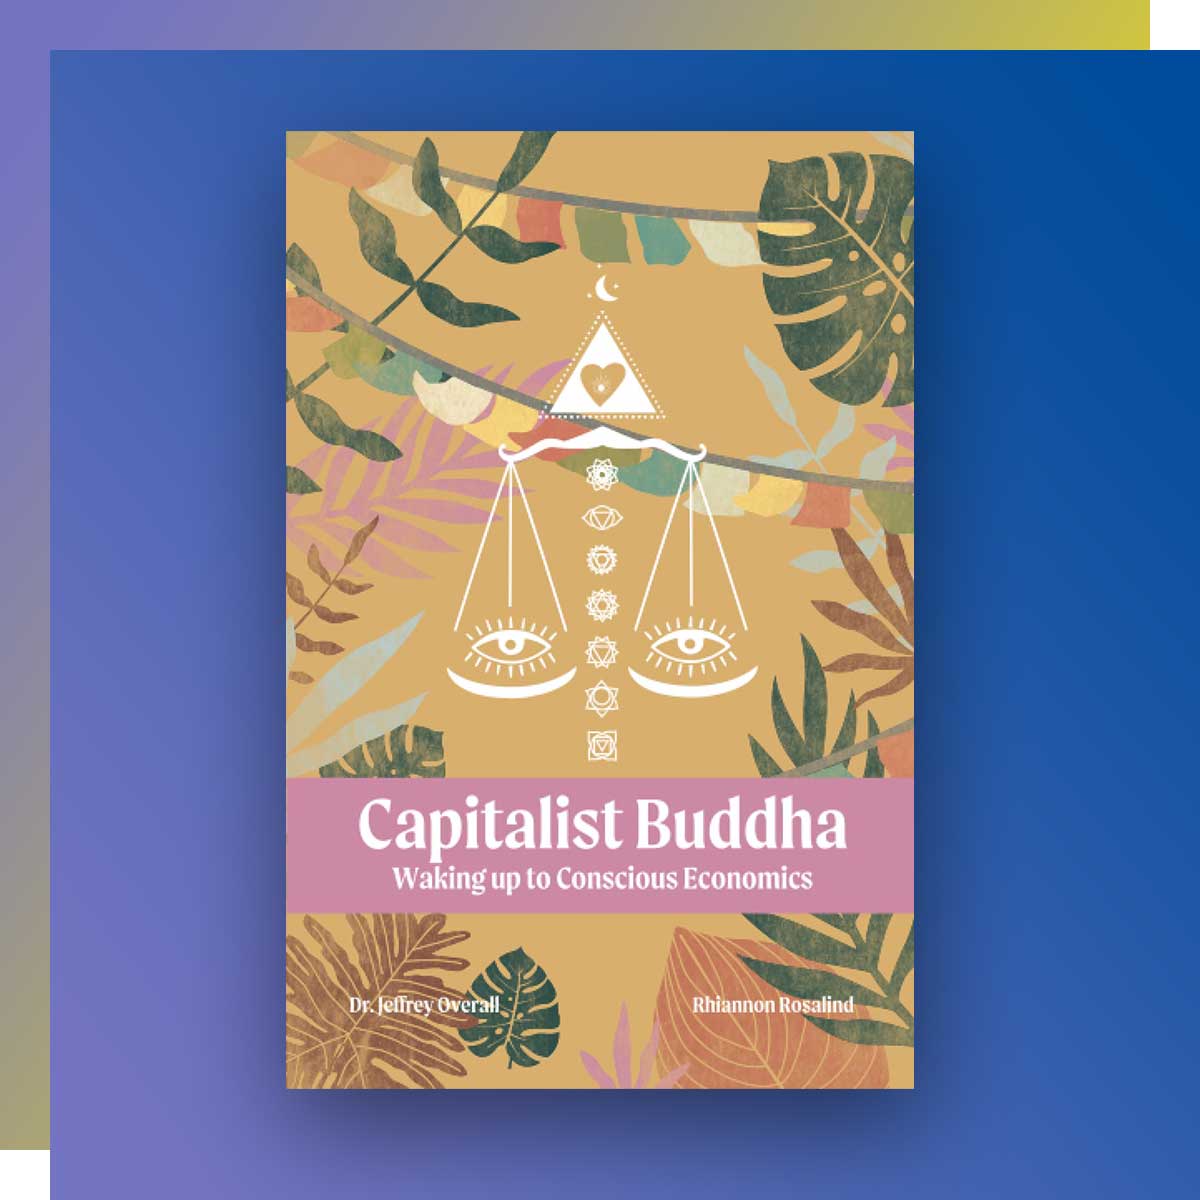 Capitalist Buddha: Waking Up to Conscious Economics by Dr. Jeffrey Overall and Rhiannon Rosalind